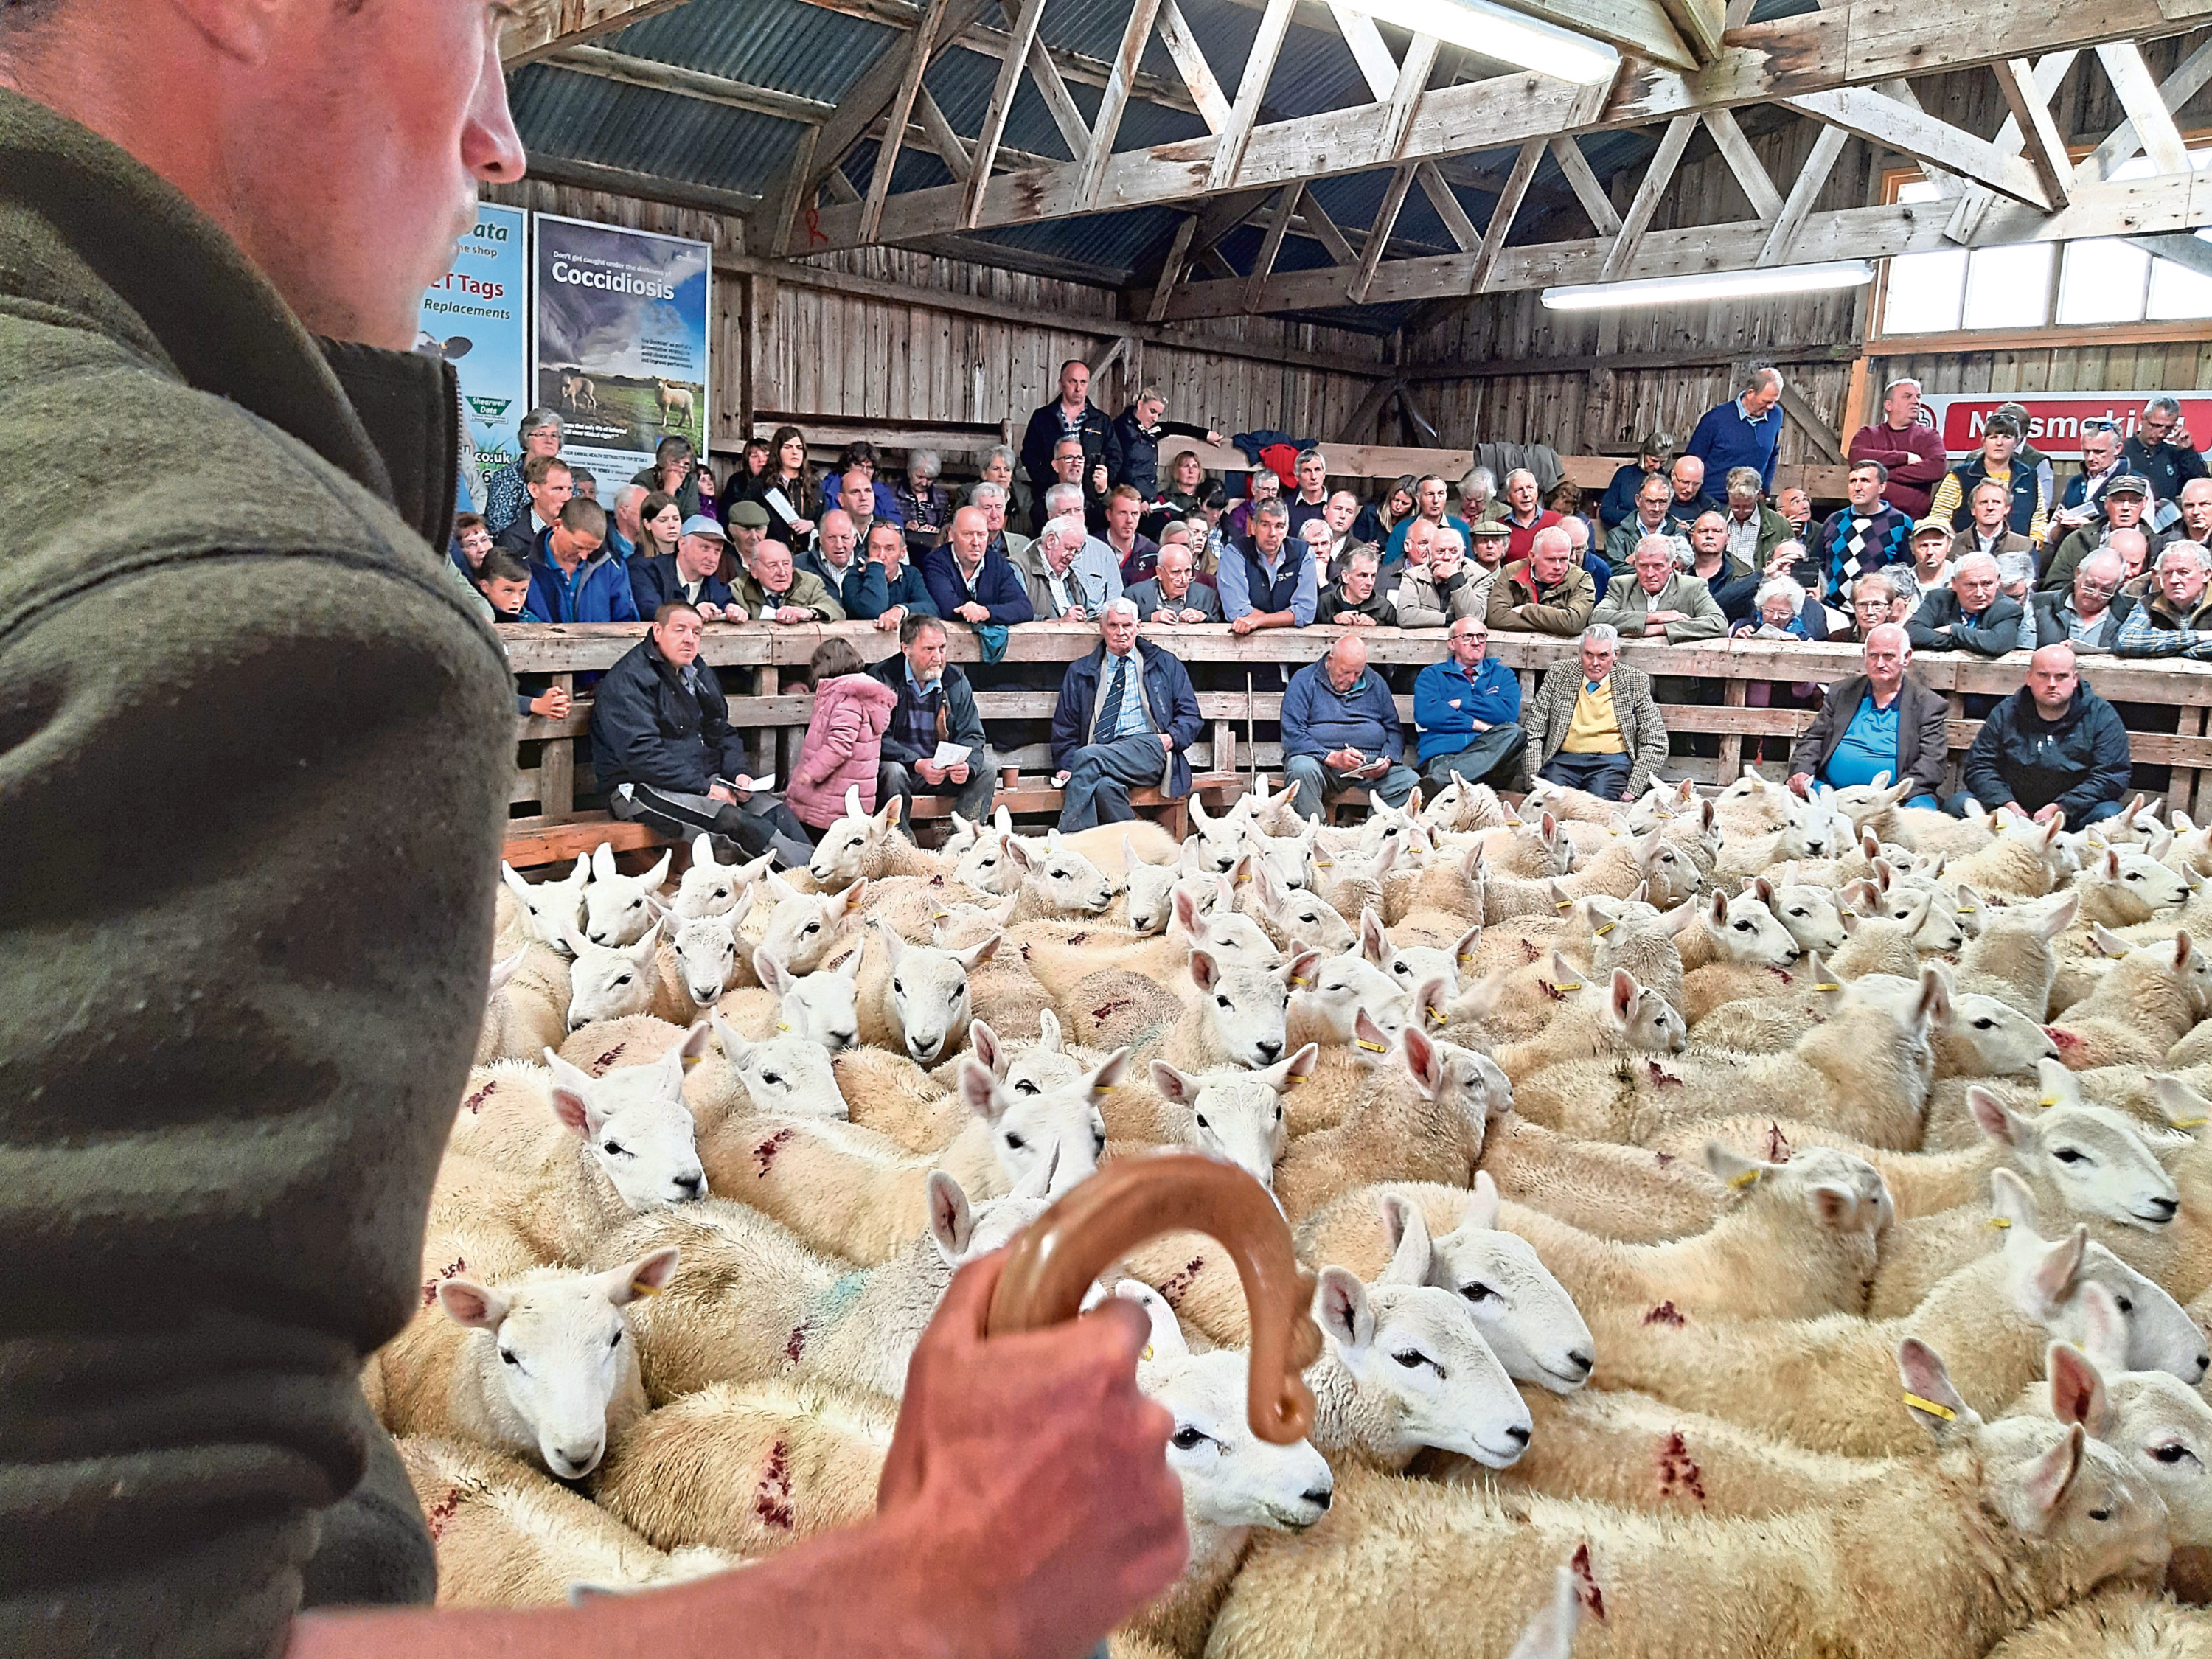 The scene inside the sale ring at Lairg.